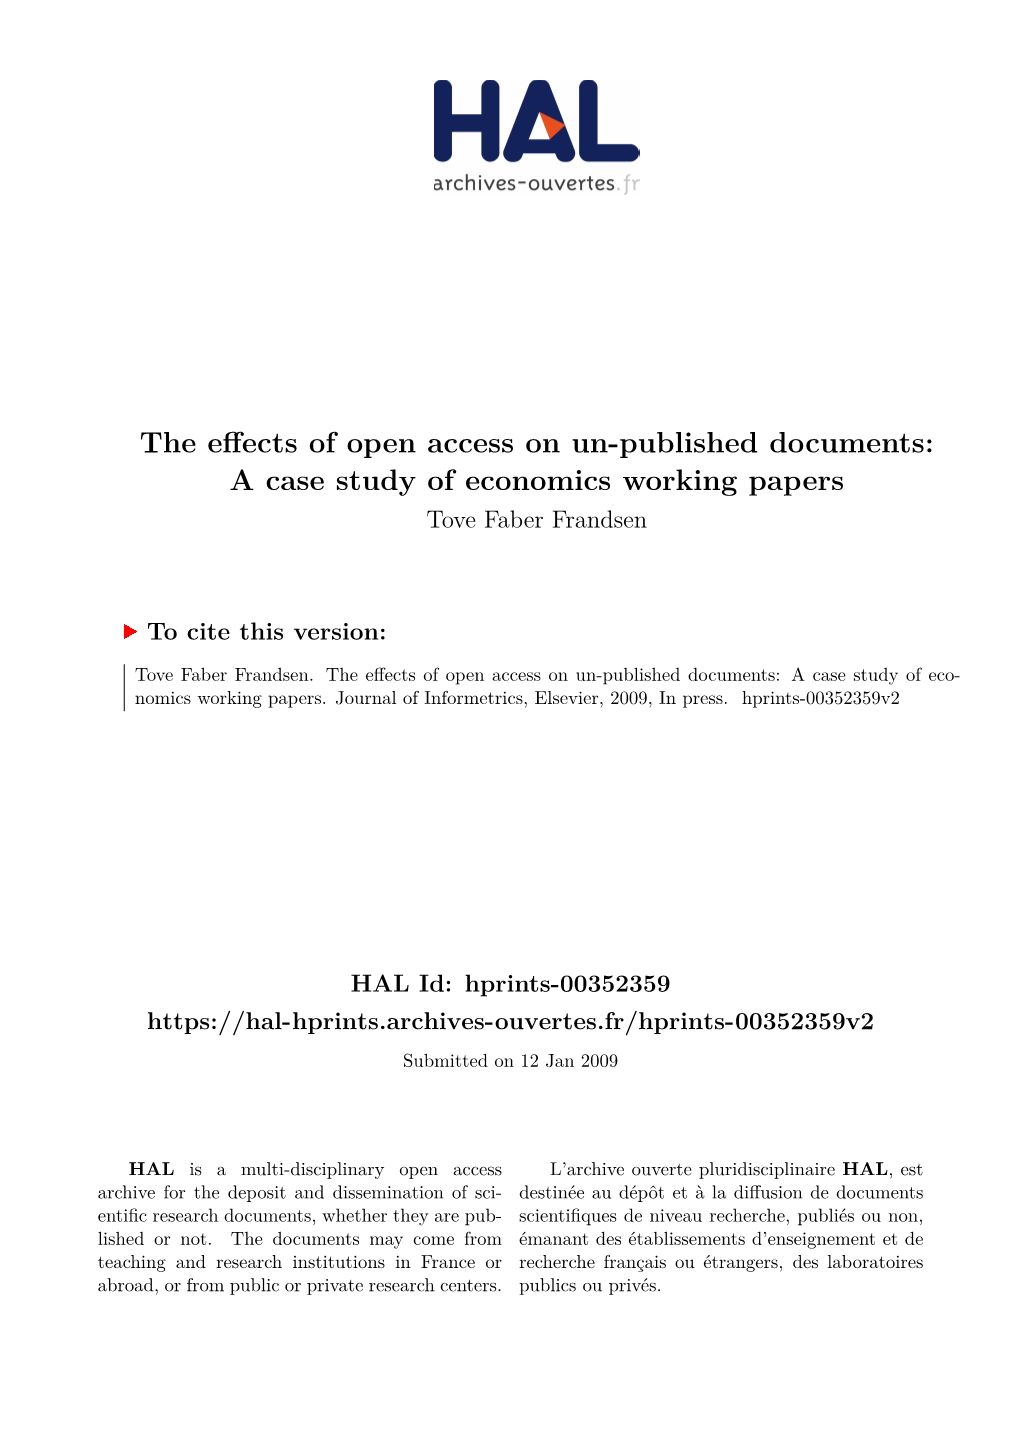 The Effects of Open Access on Un-Published Documents: a Case Study of Economics Working Papers Tove Faber Frandsen